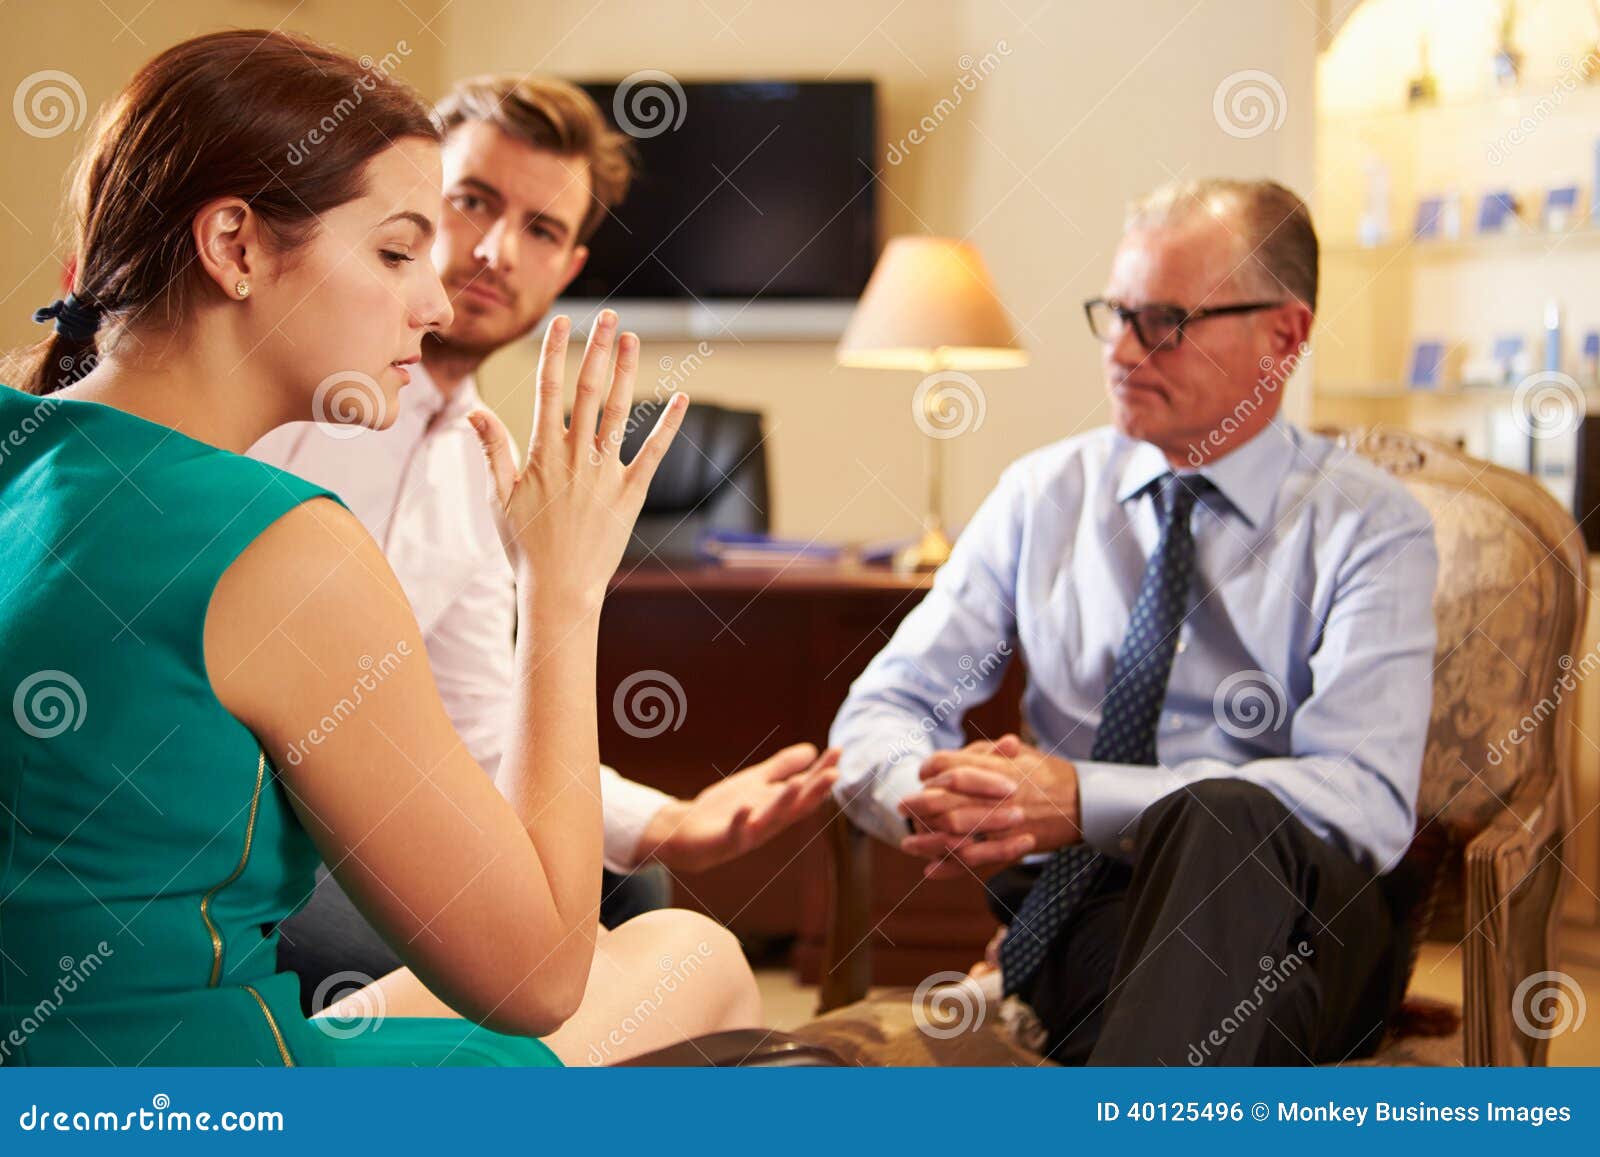 young couple talking to male counsellor